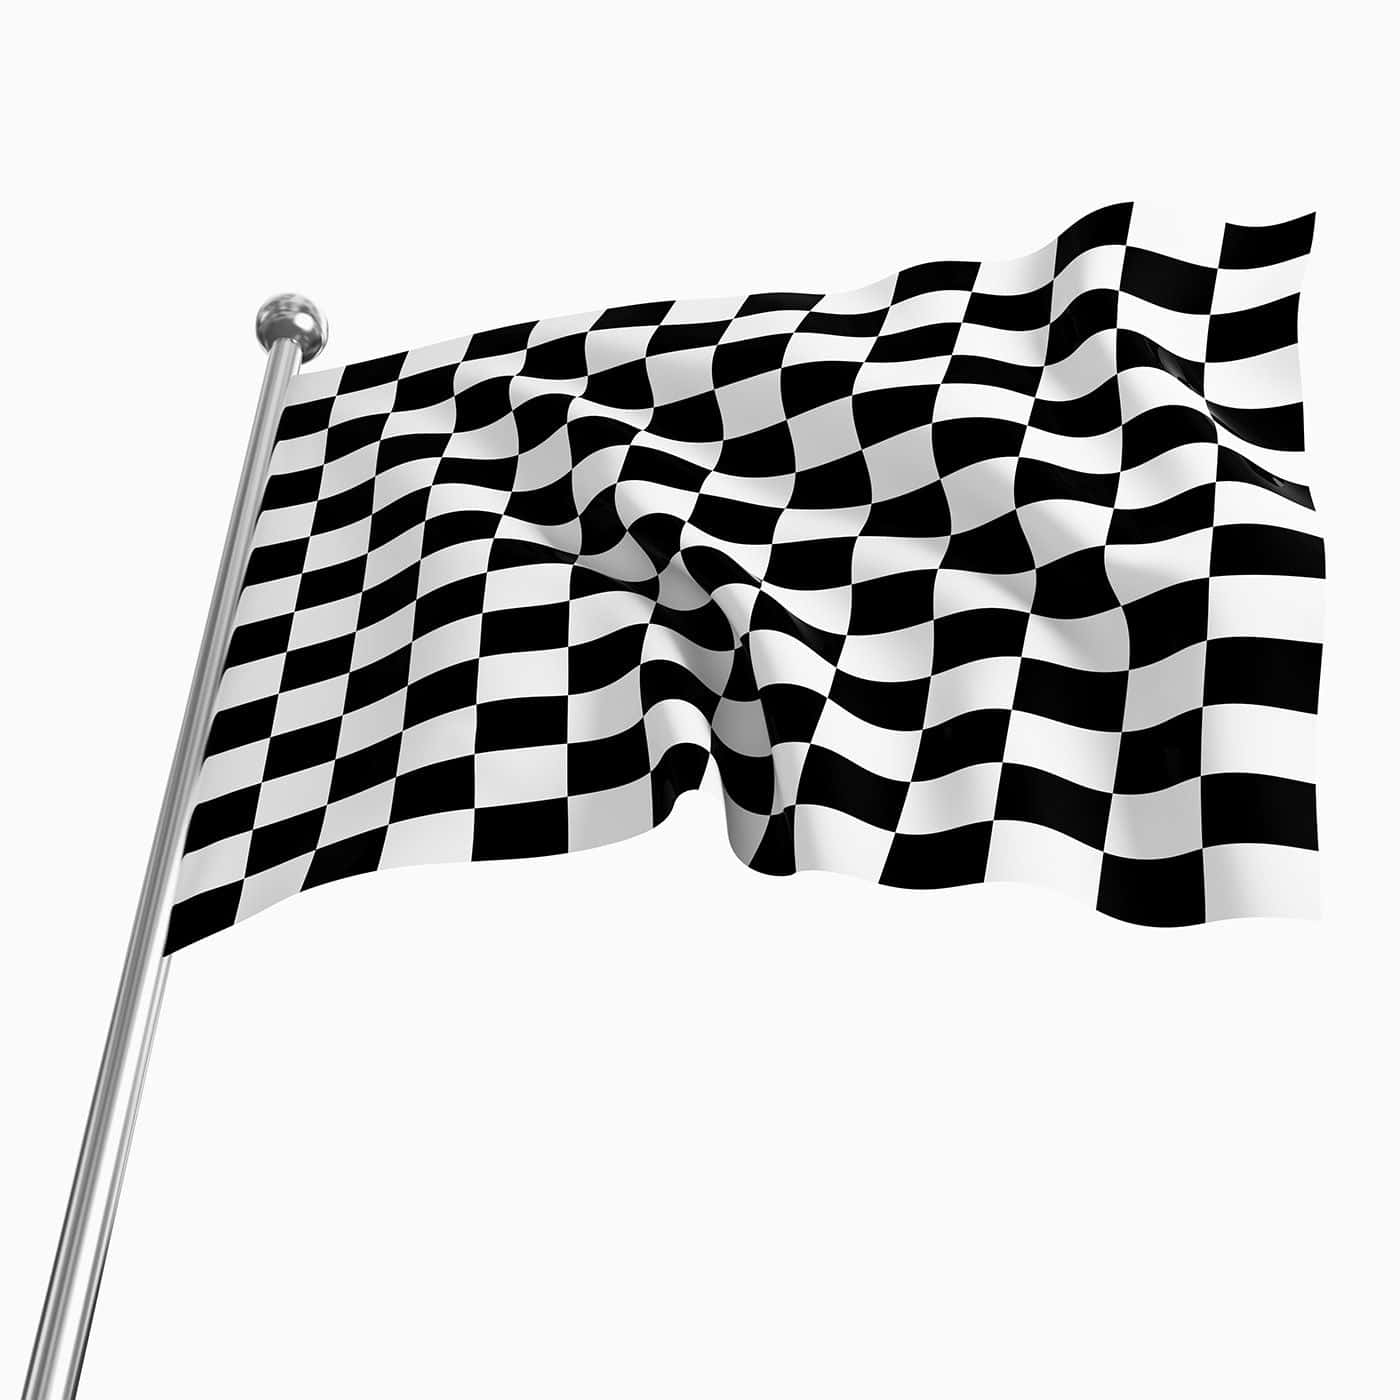 Start Your Engines and Race Towards the Checkered Flag